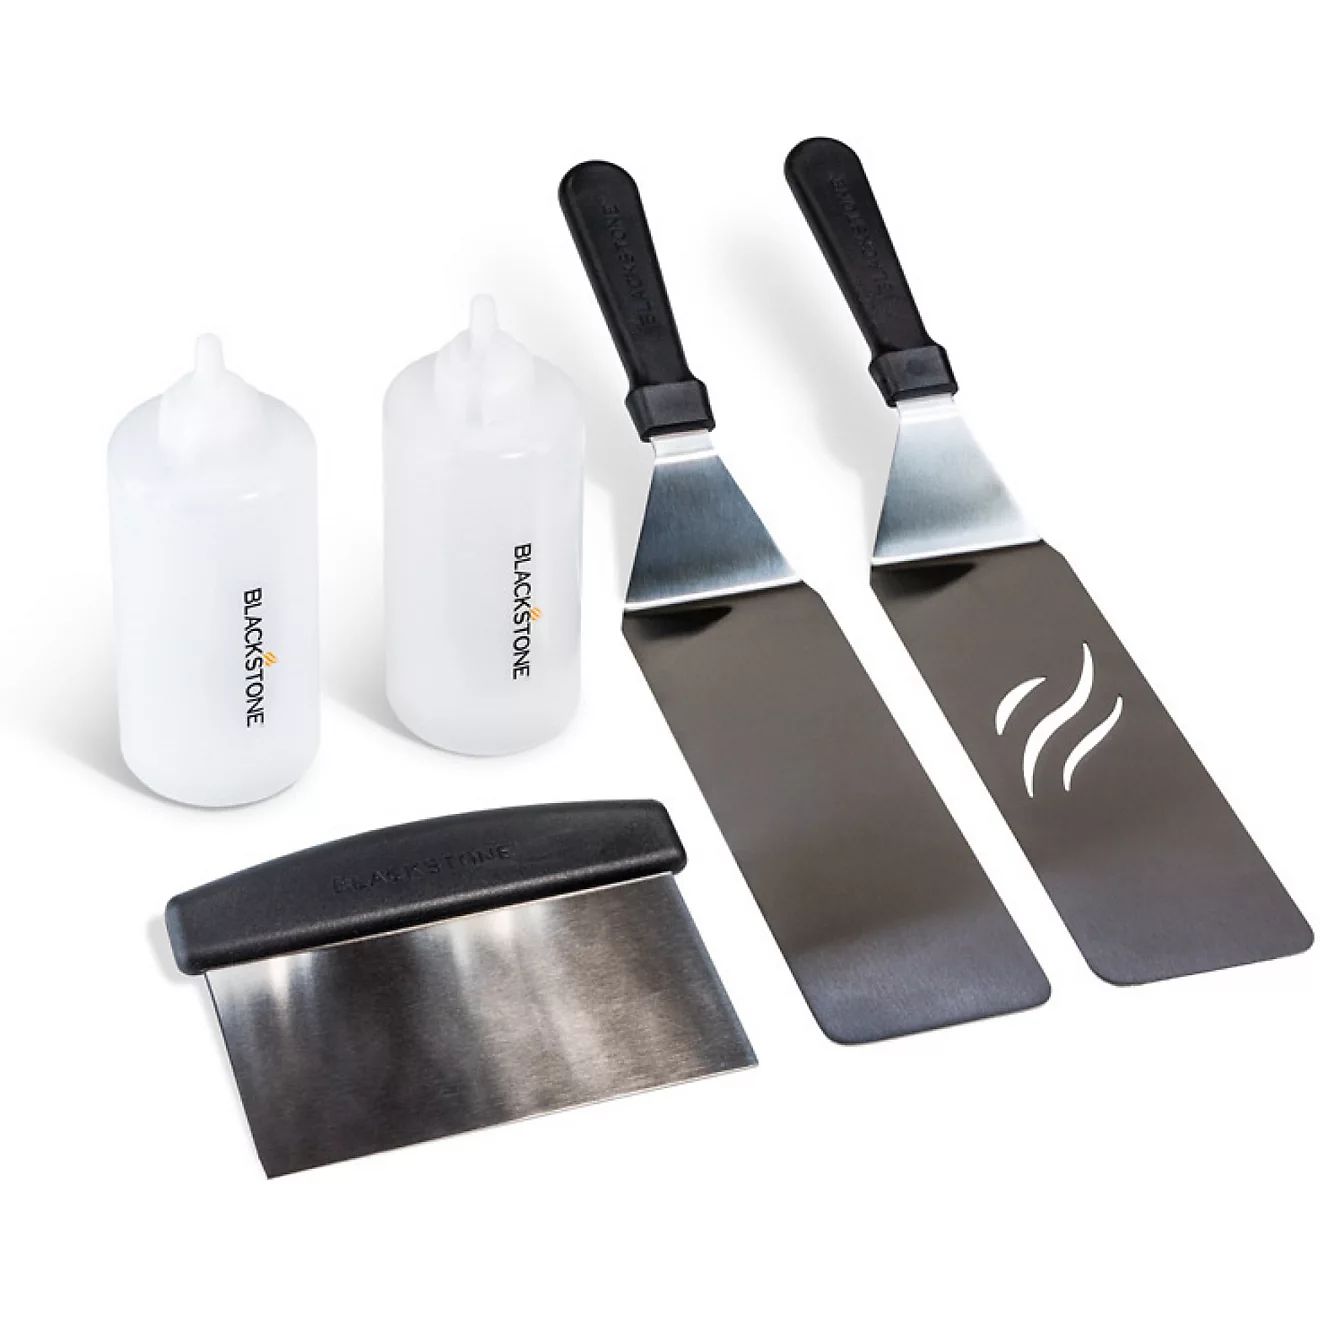 Blackstone Griddle Accessory Tool Kit | Academy Sports + Outdoors